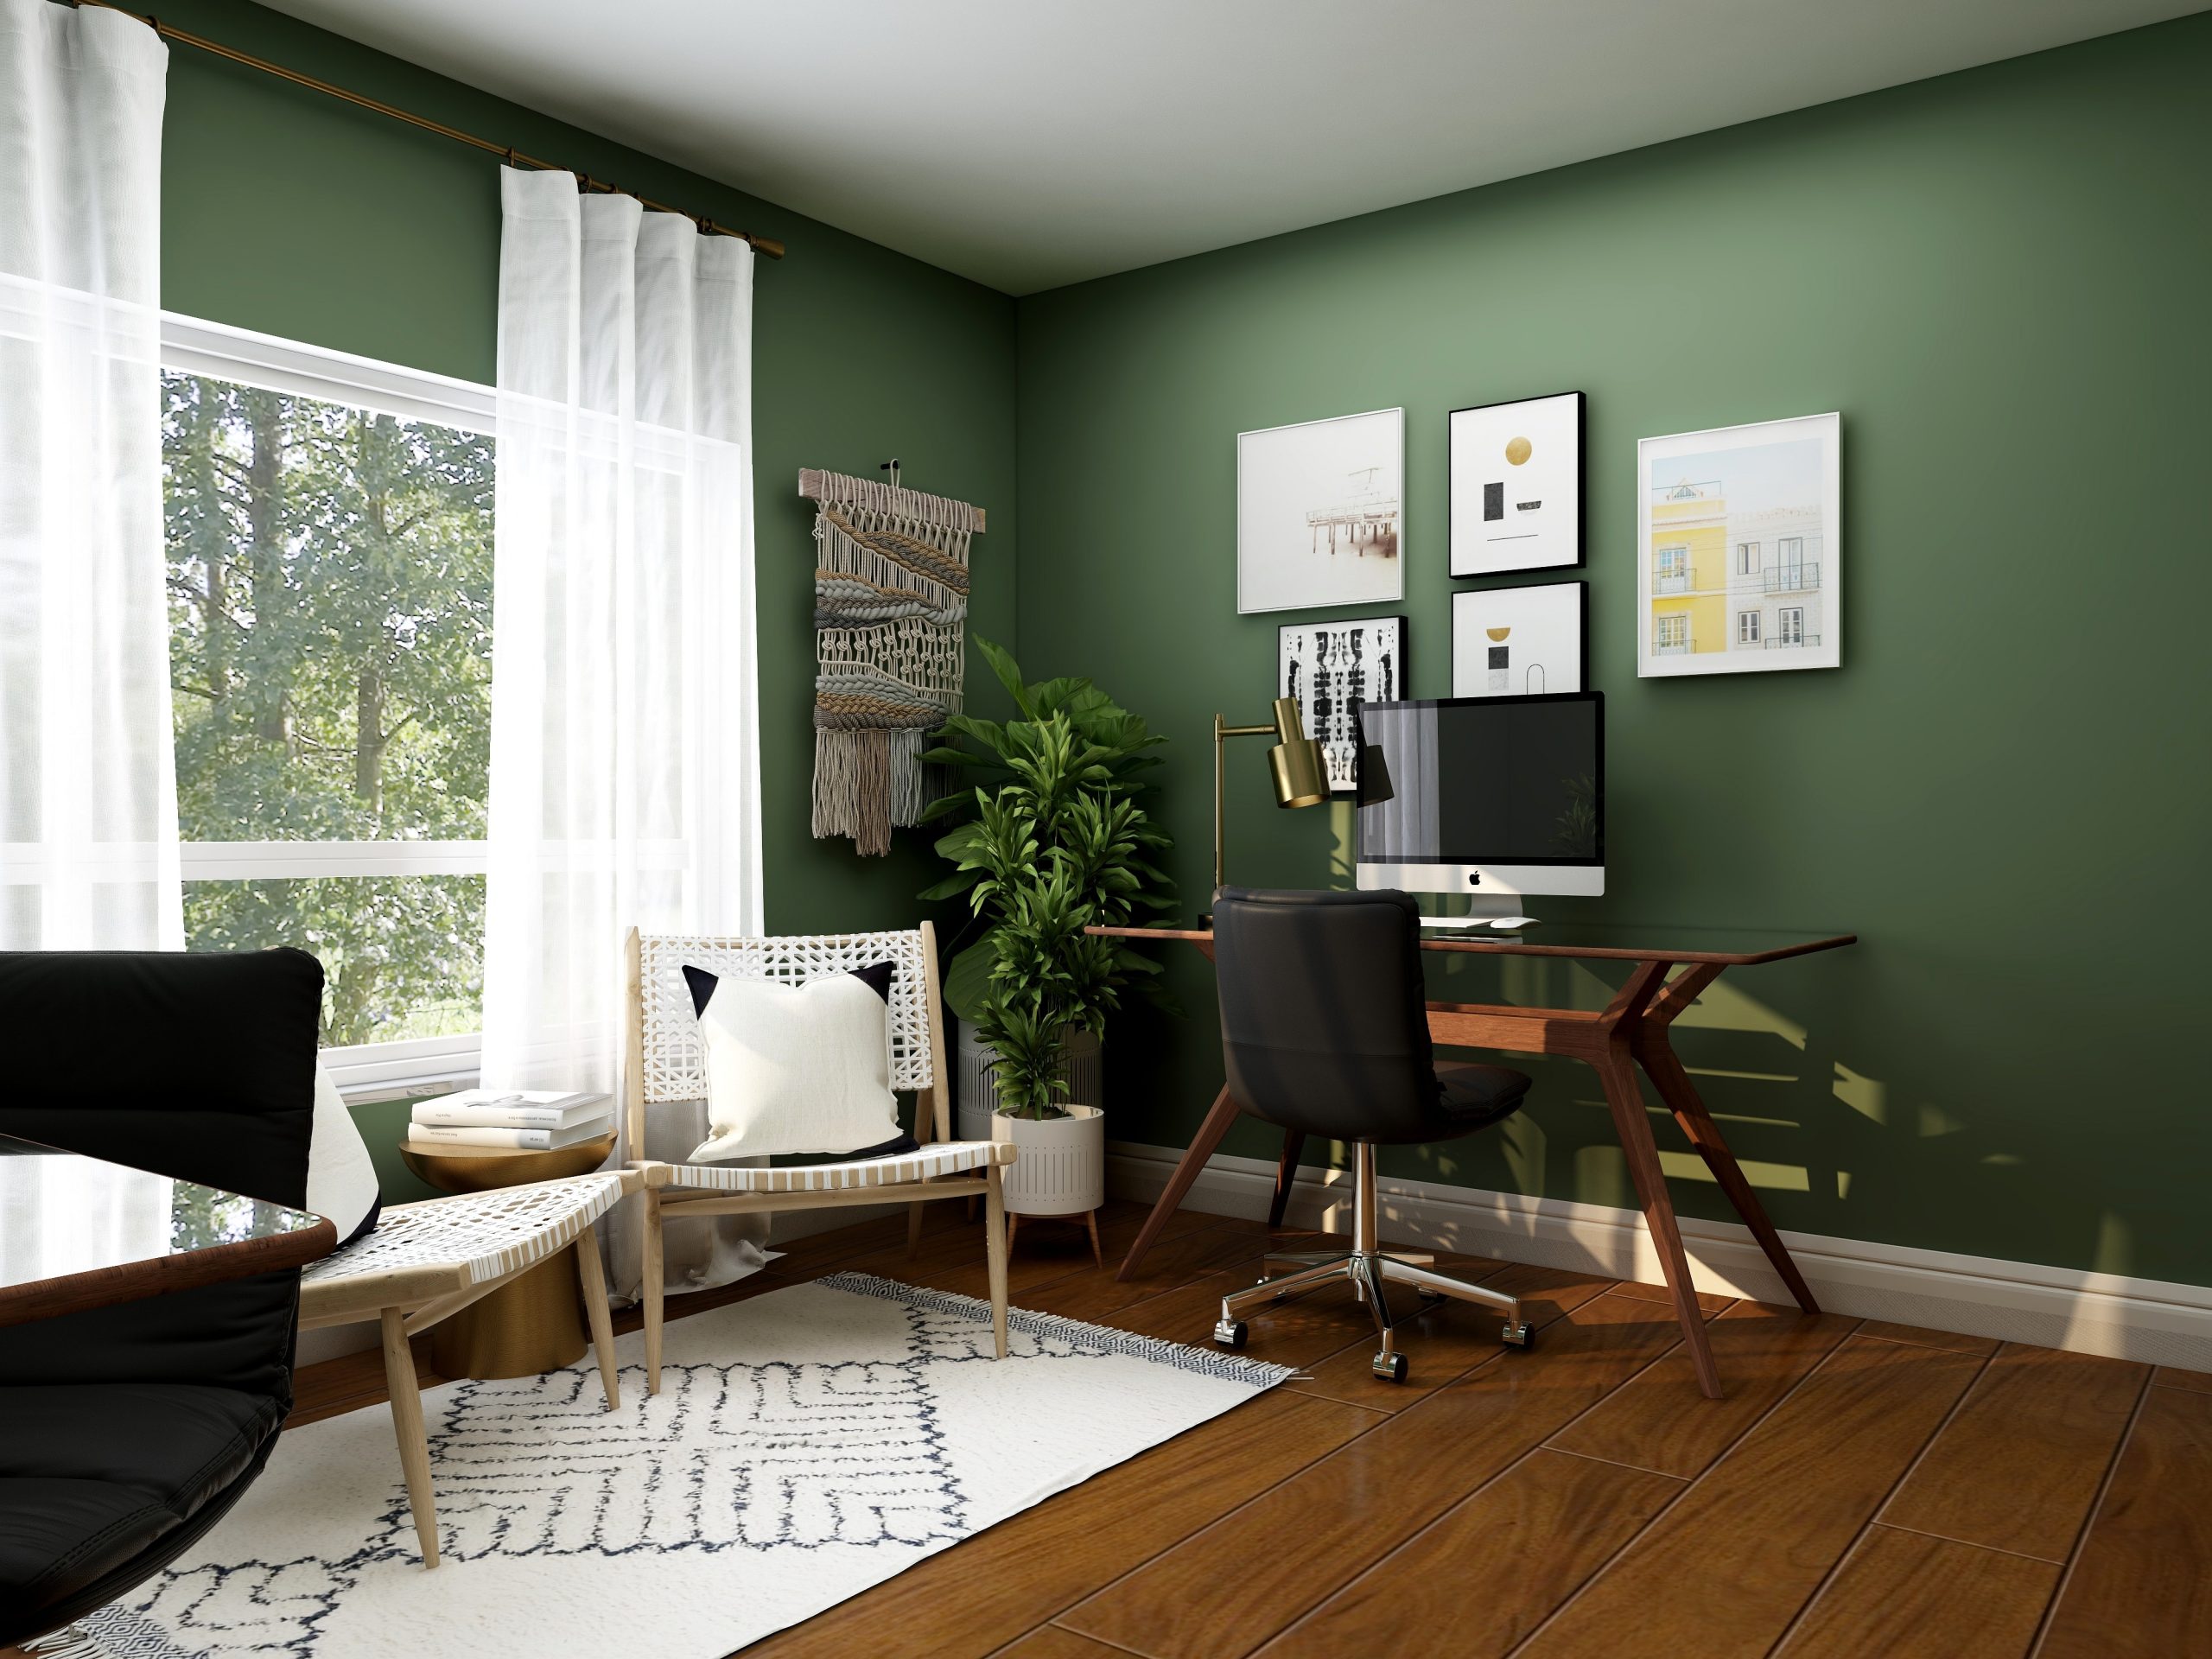 Home office with green walls, desk and chair, white curtains and paintings on wall